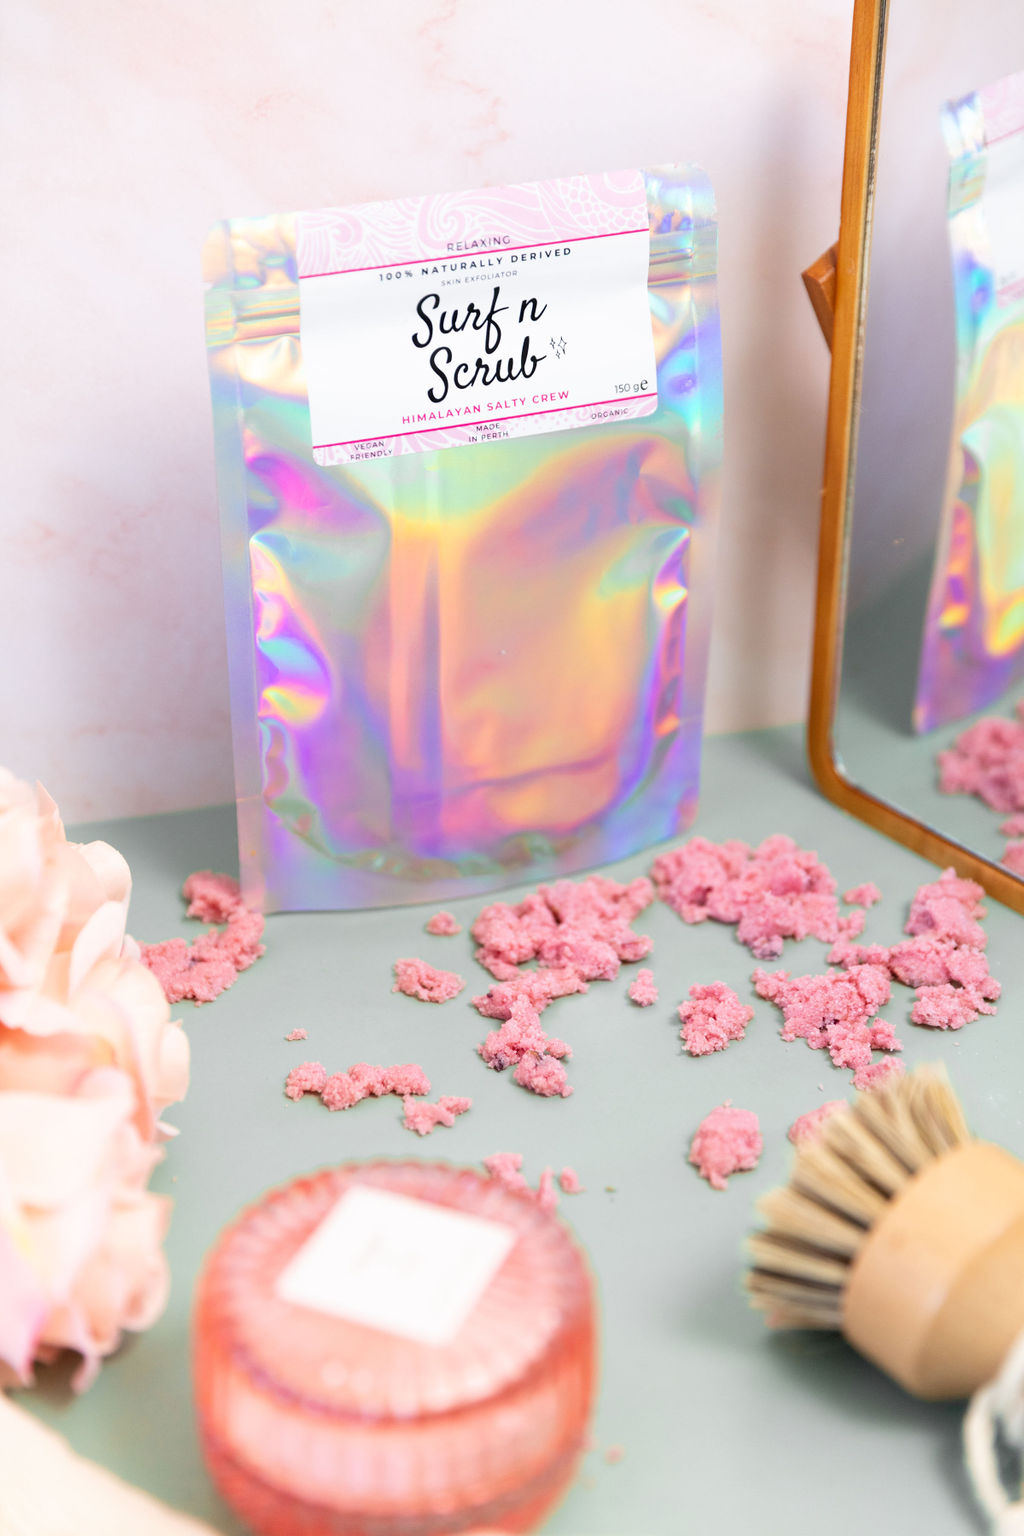 Colourful Styled Product Photography for Skincare Brand Surf n Scrub